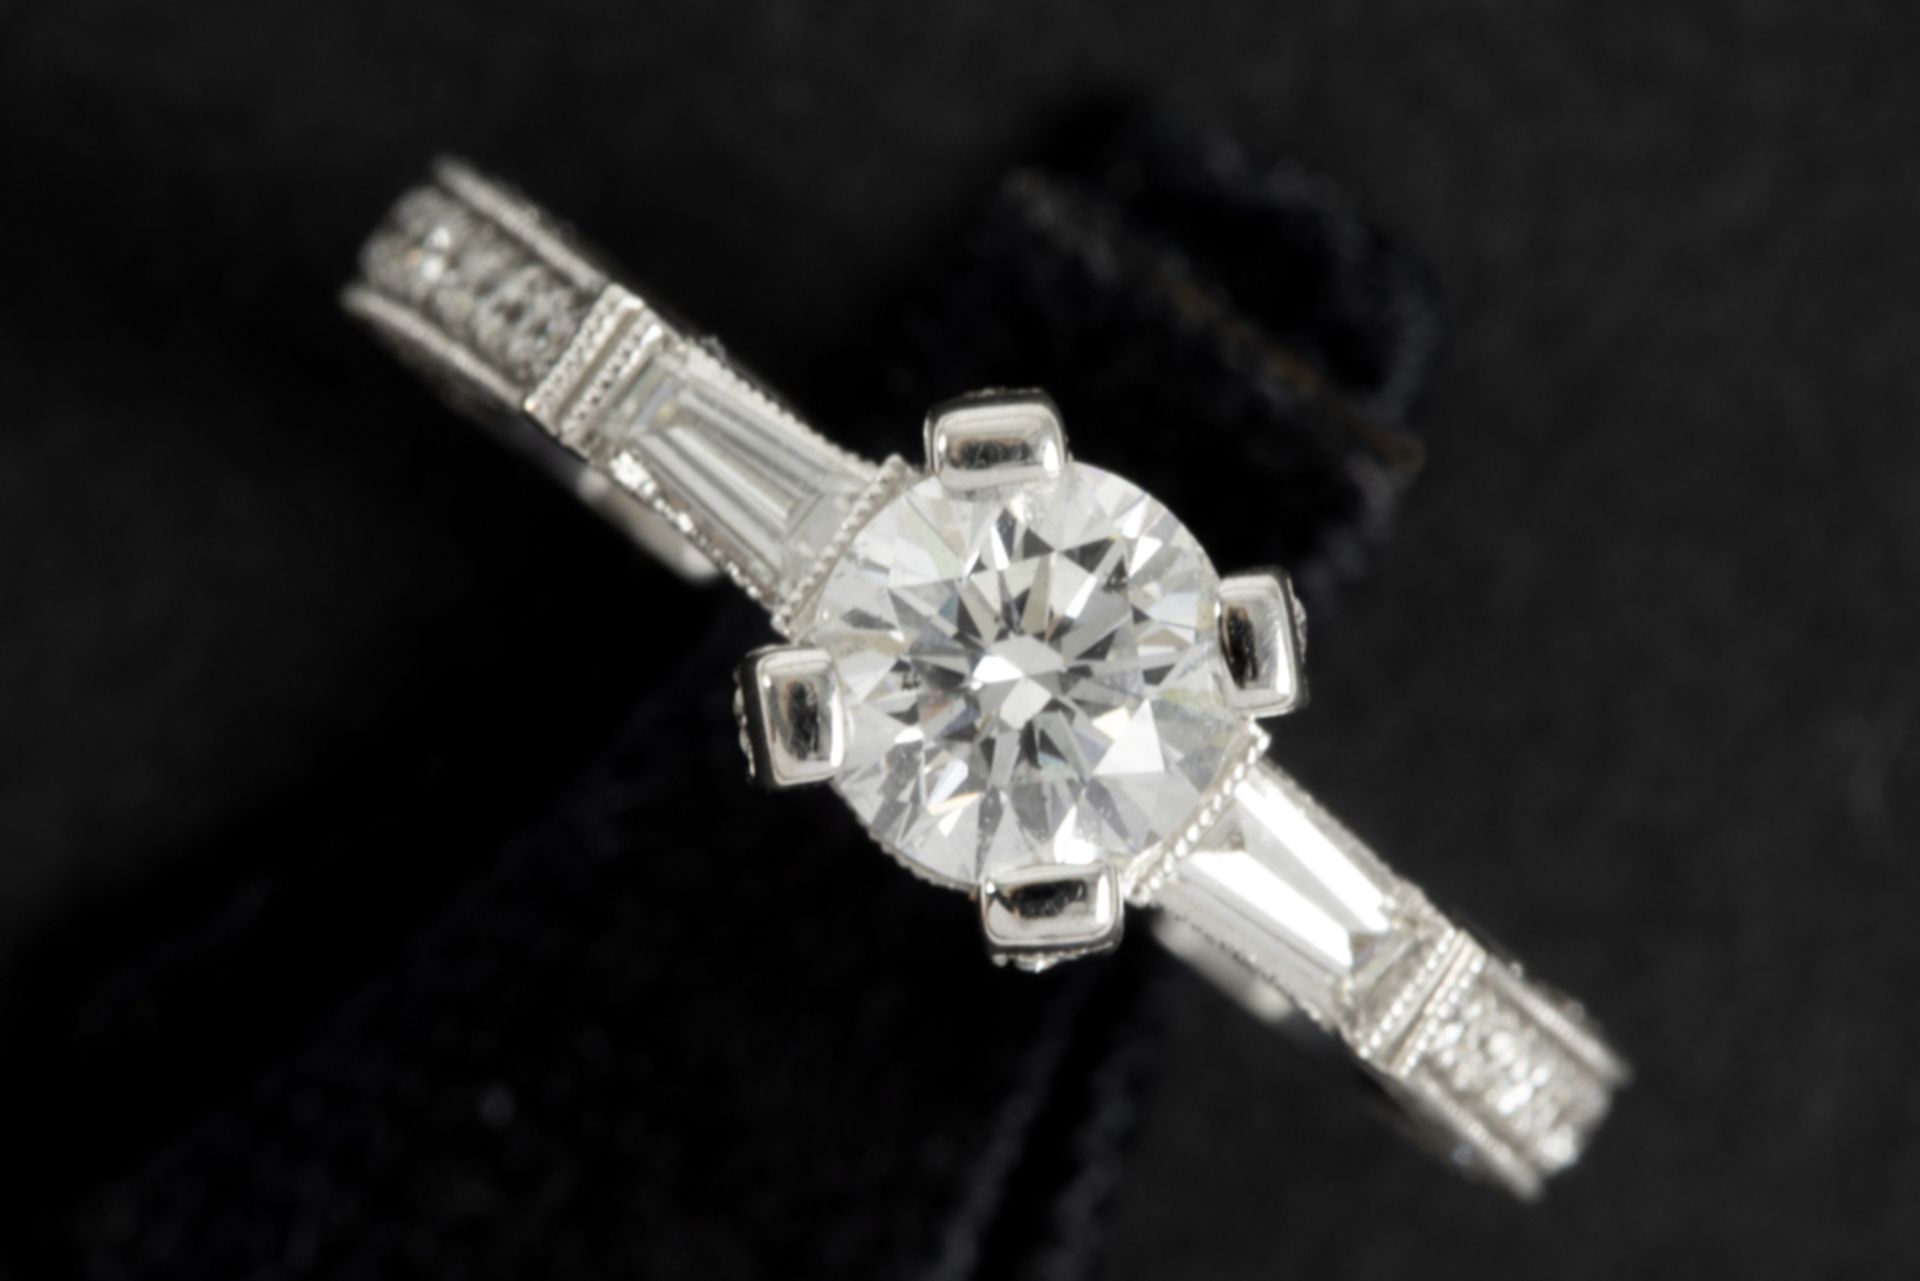 a 0,80 carat high quality brilliant cut diamond set in a ring in white gold (18 carat) with more